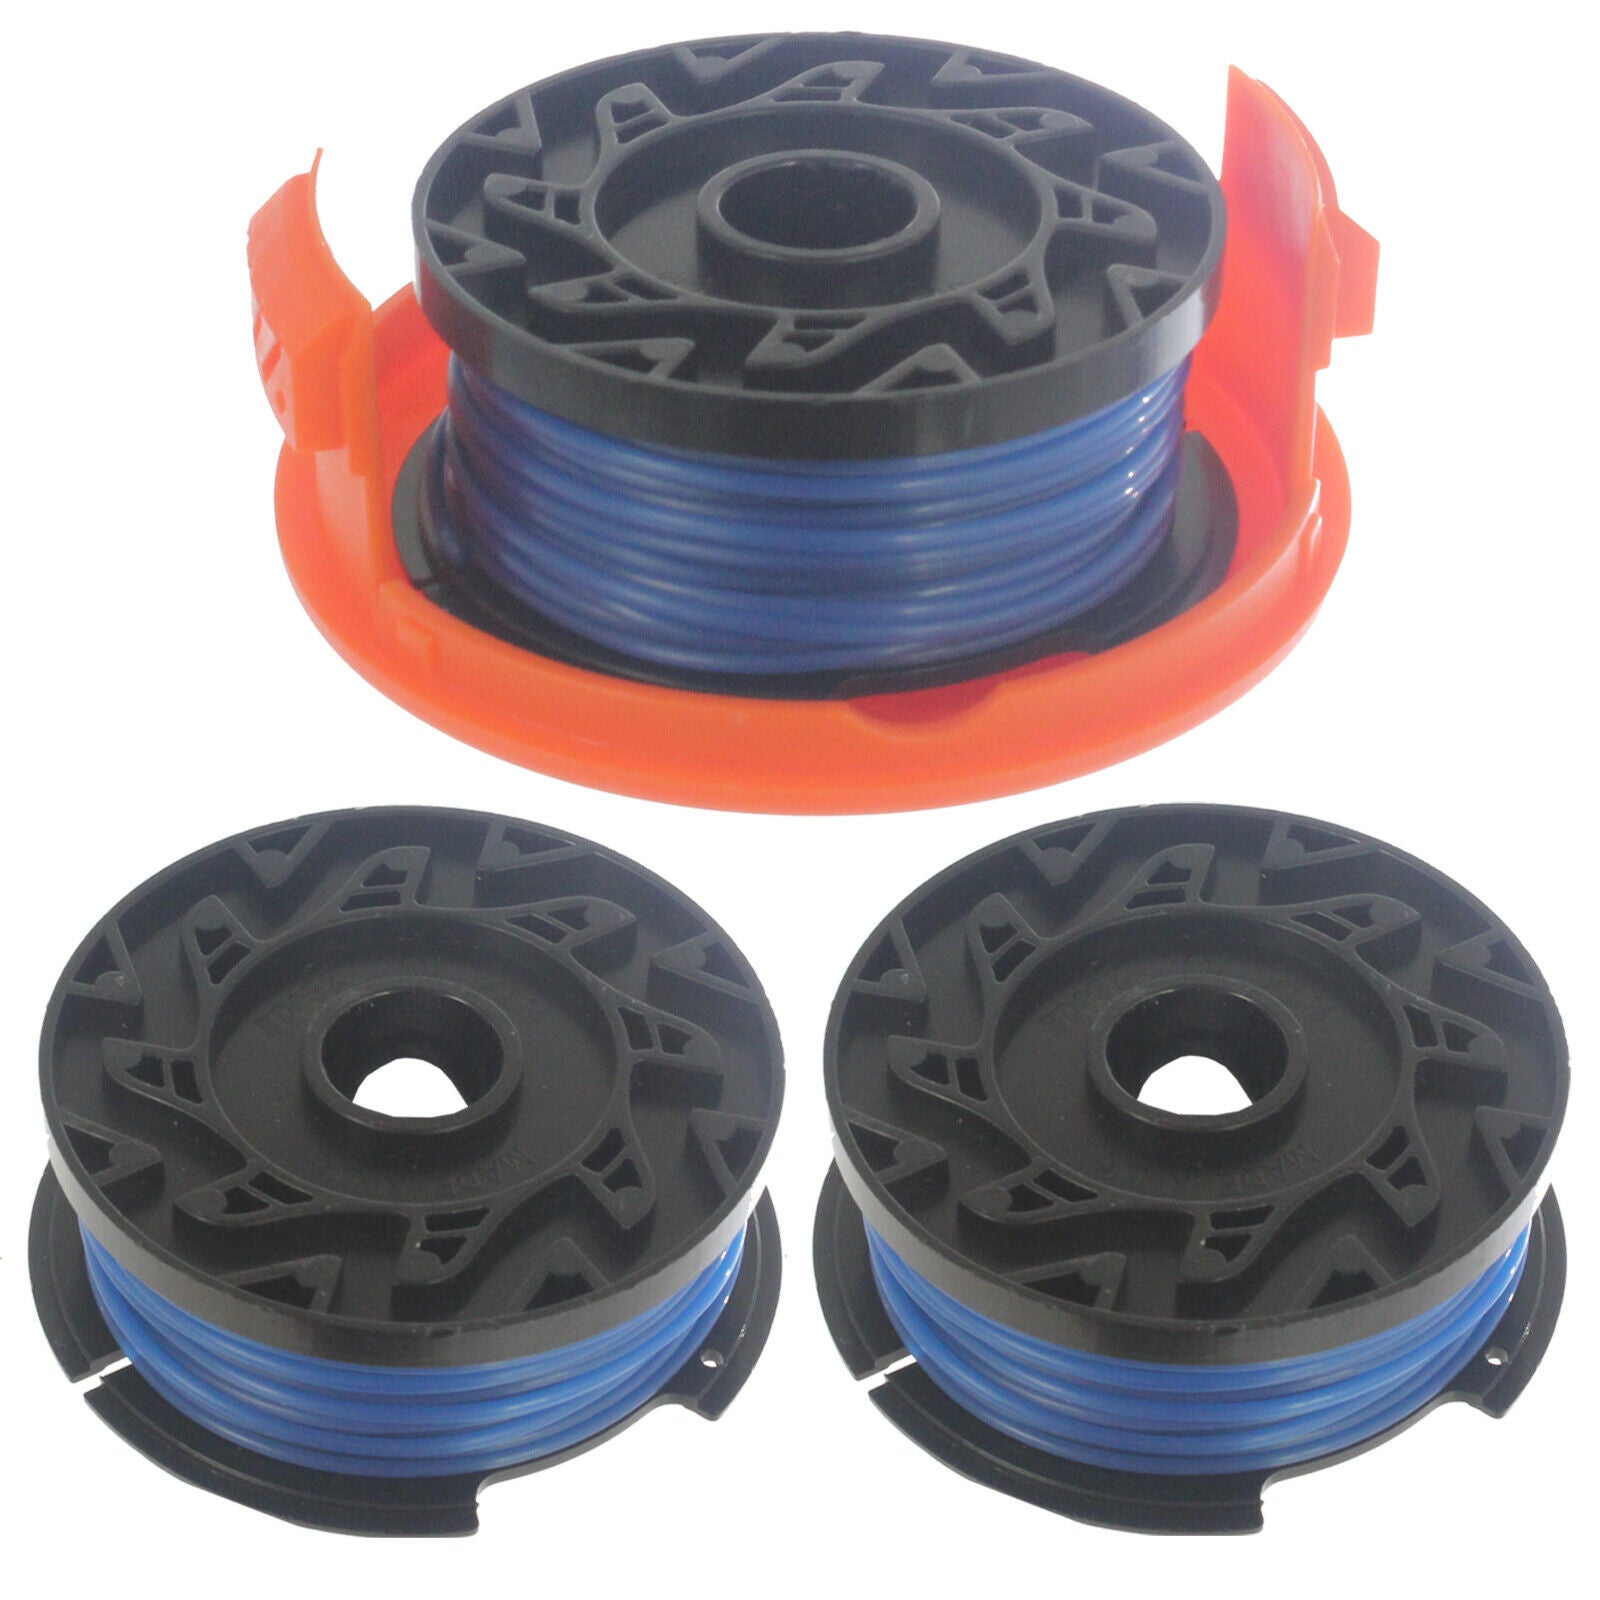 Strimmer Line 3 x Spools and Cover for Black and Decker GL301 GL340 GL430 GL550 GL570 Trimmer (10m x 1.5mm)